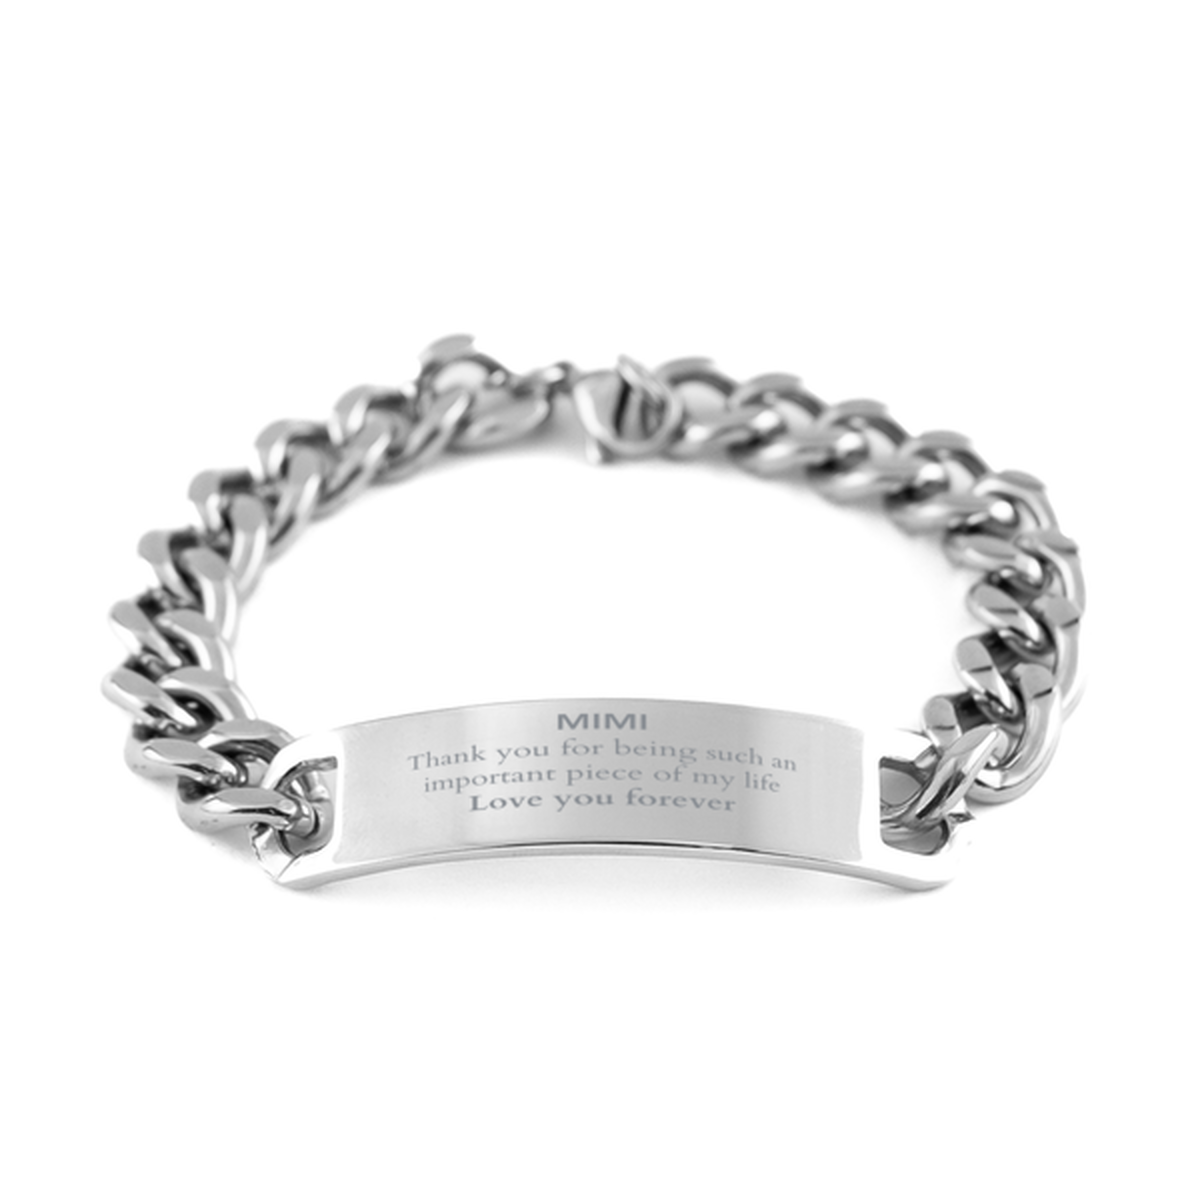 Appropriate Mimi Cuban Chain Stainless Steel Bracelet Epic Birthday Gifts for Mimi Thank you for being such an important piece of my life Mimi Christmas Mothers Fathers Day